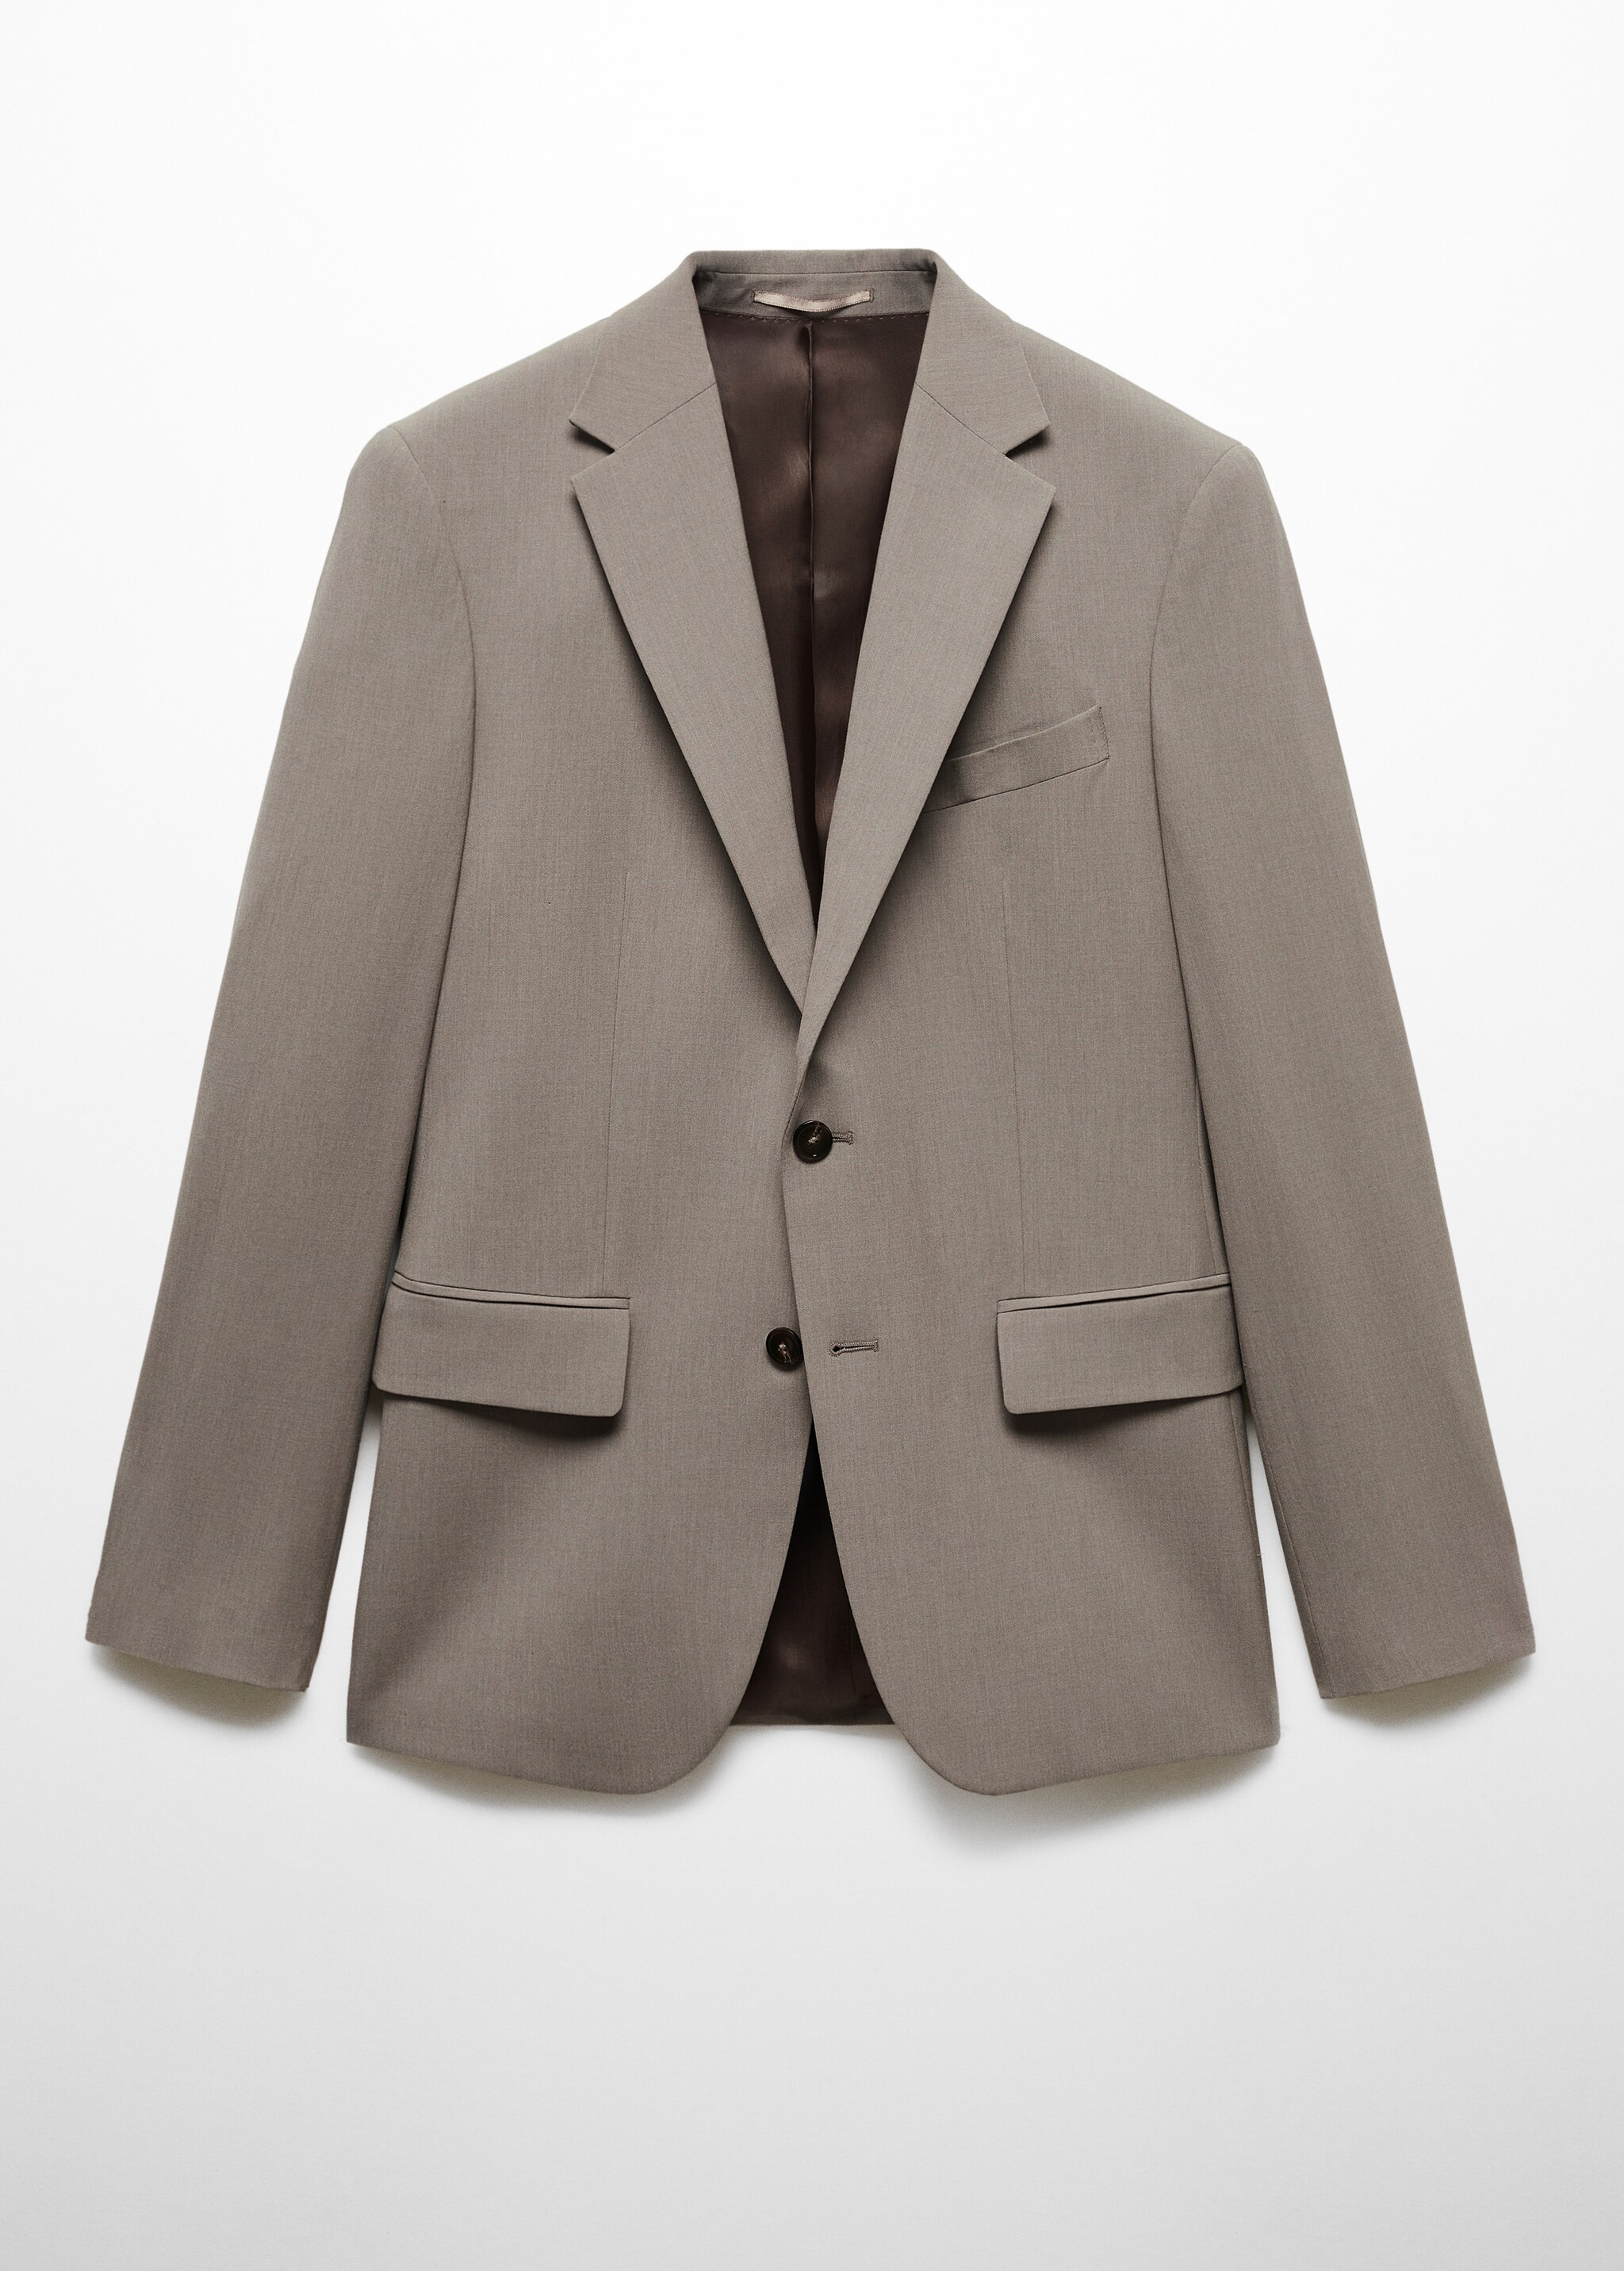 Slim fit cold wool suit jacket - Article without model